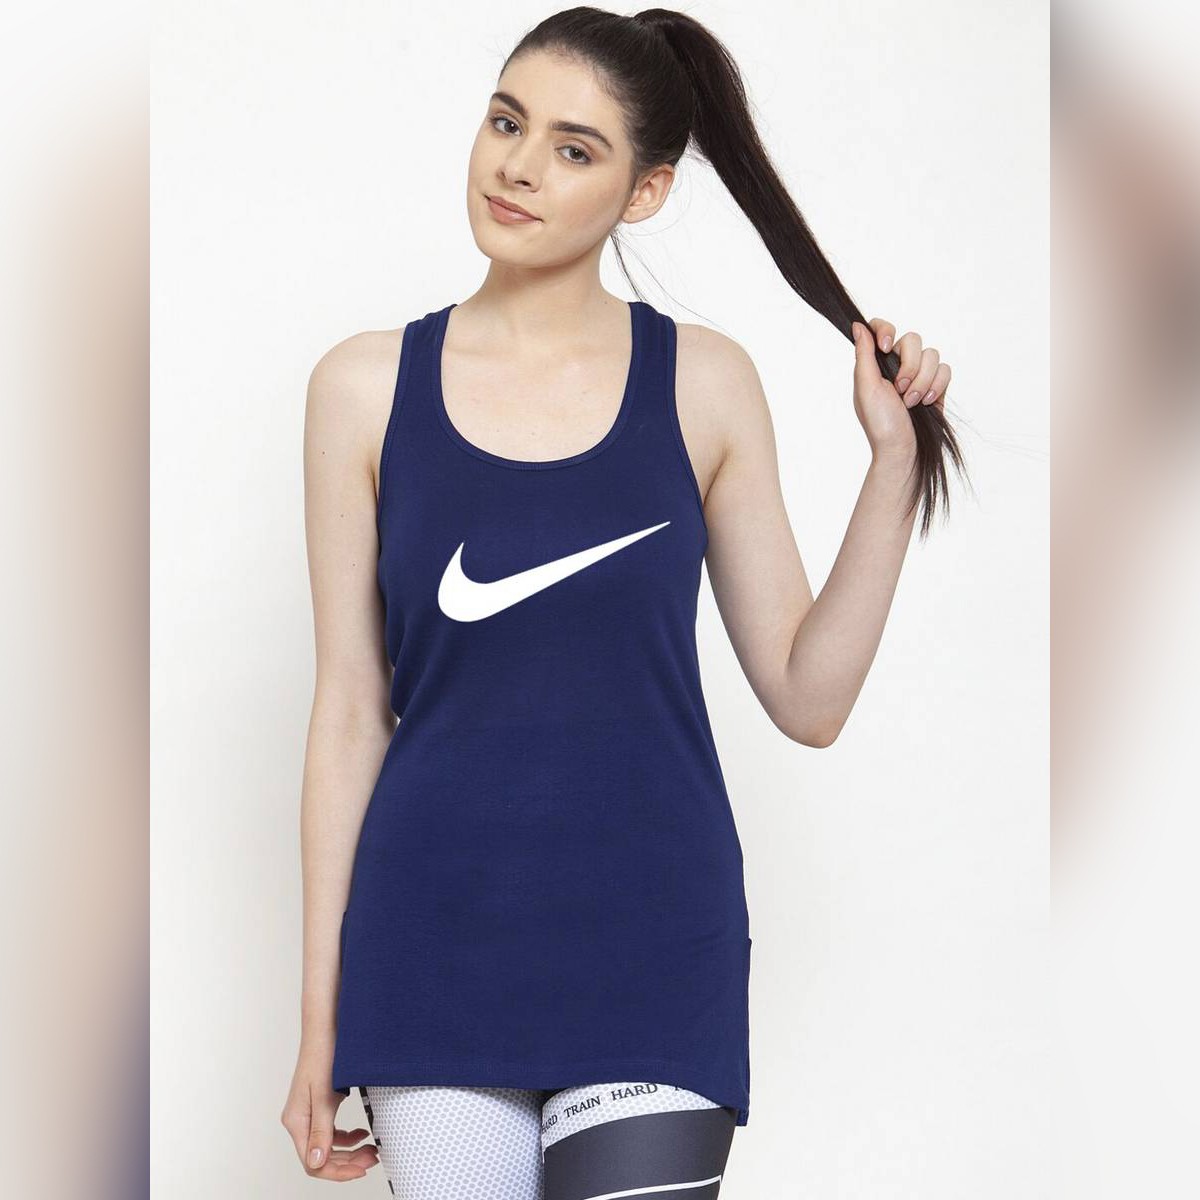 Best Tank Top for Girls Price in Bangladesh